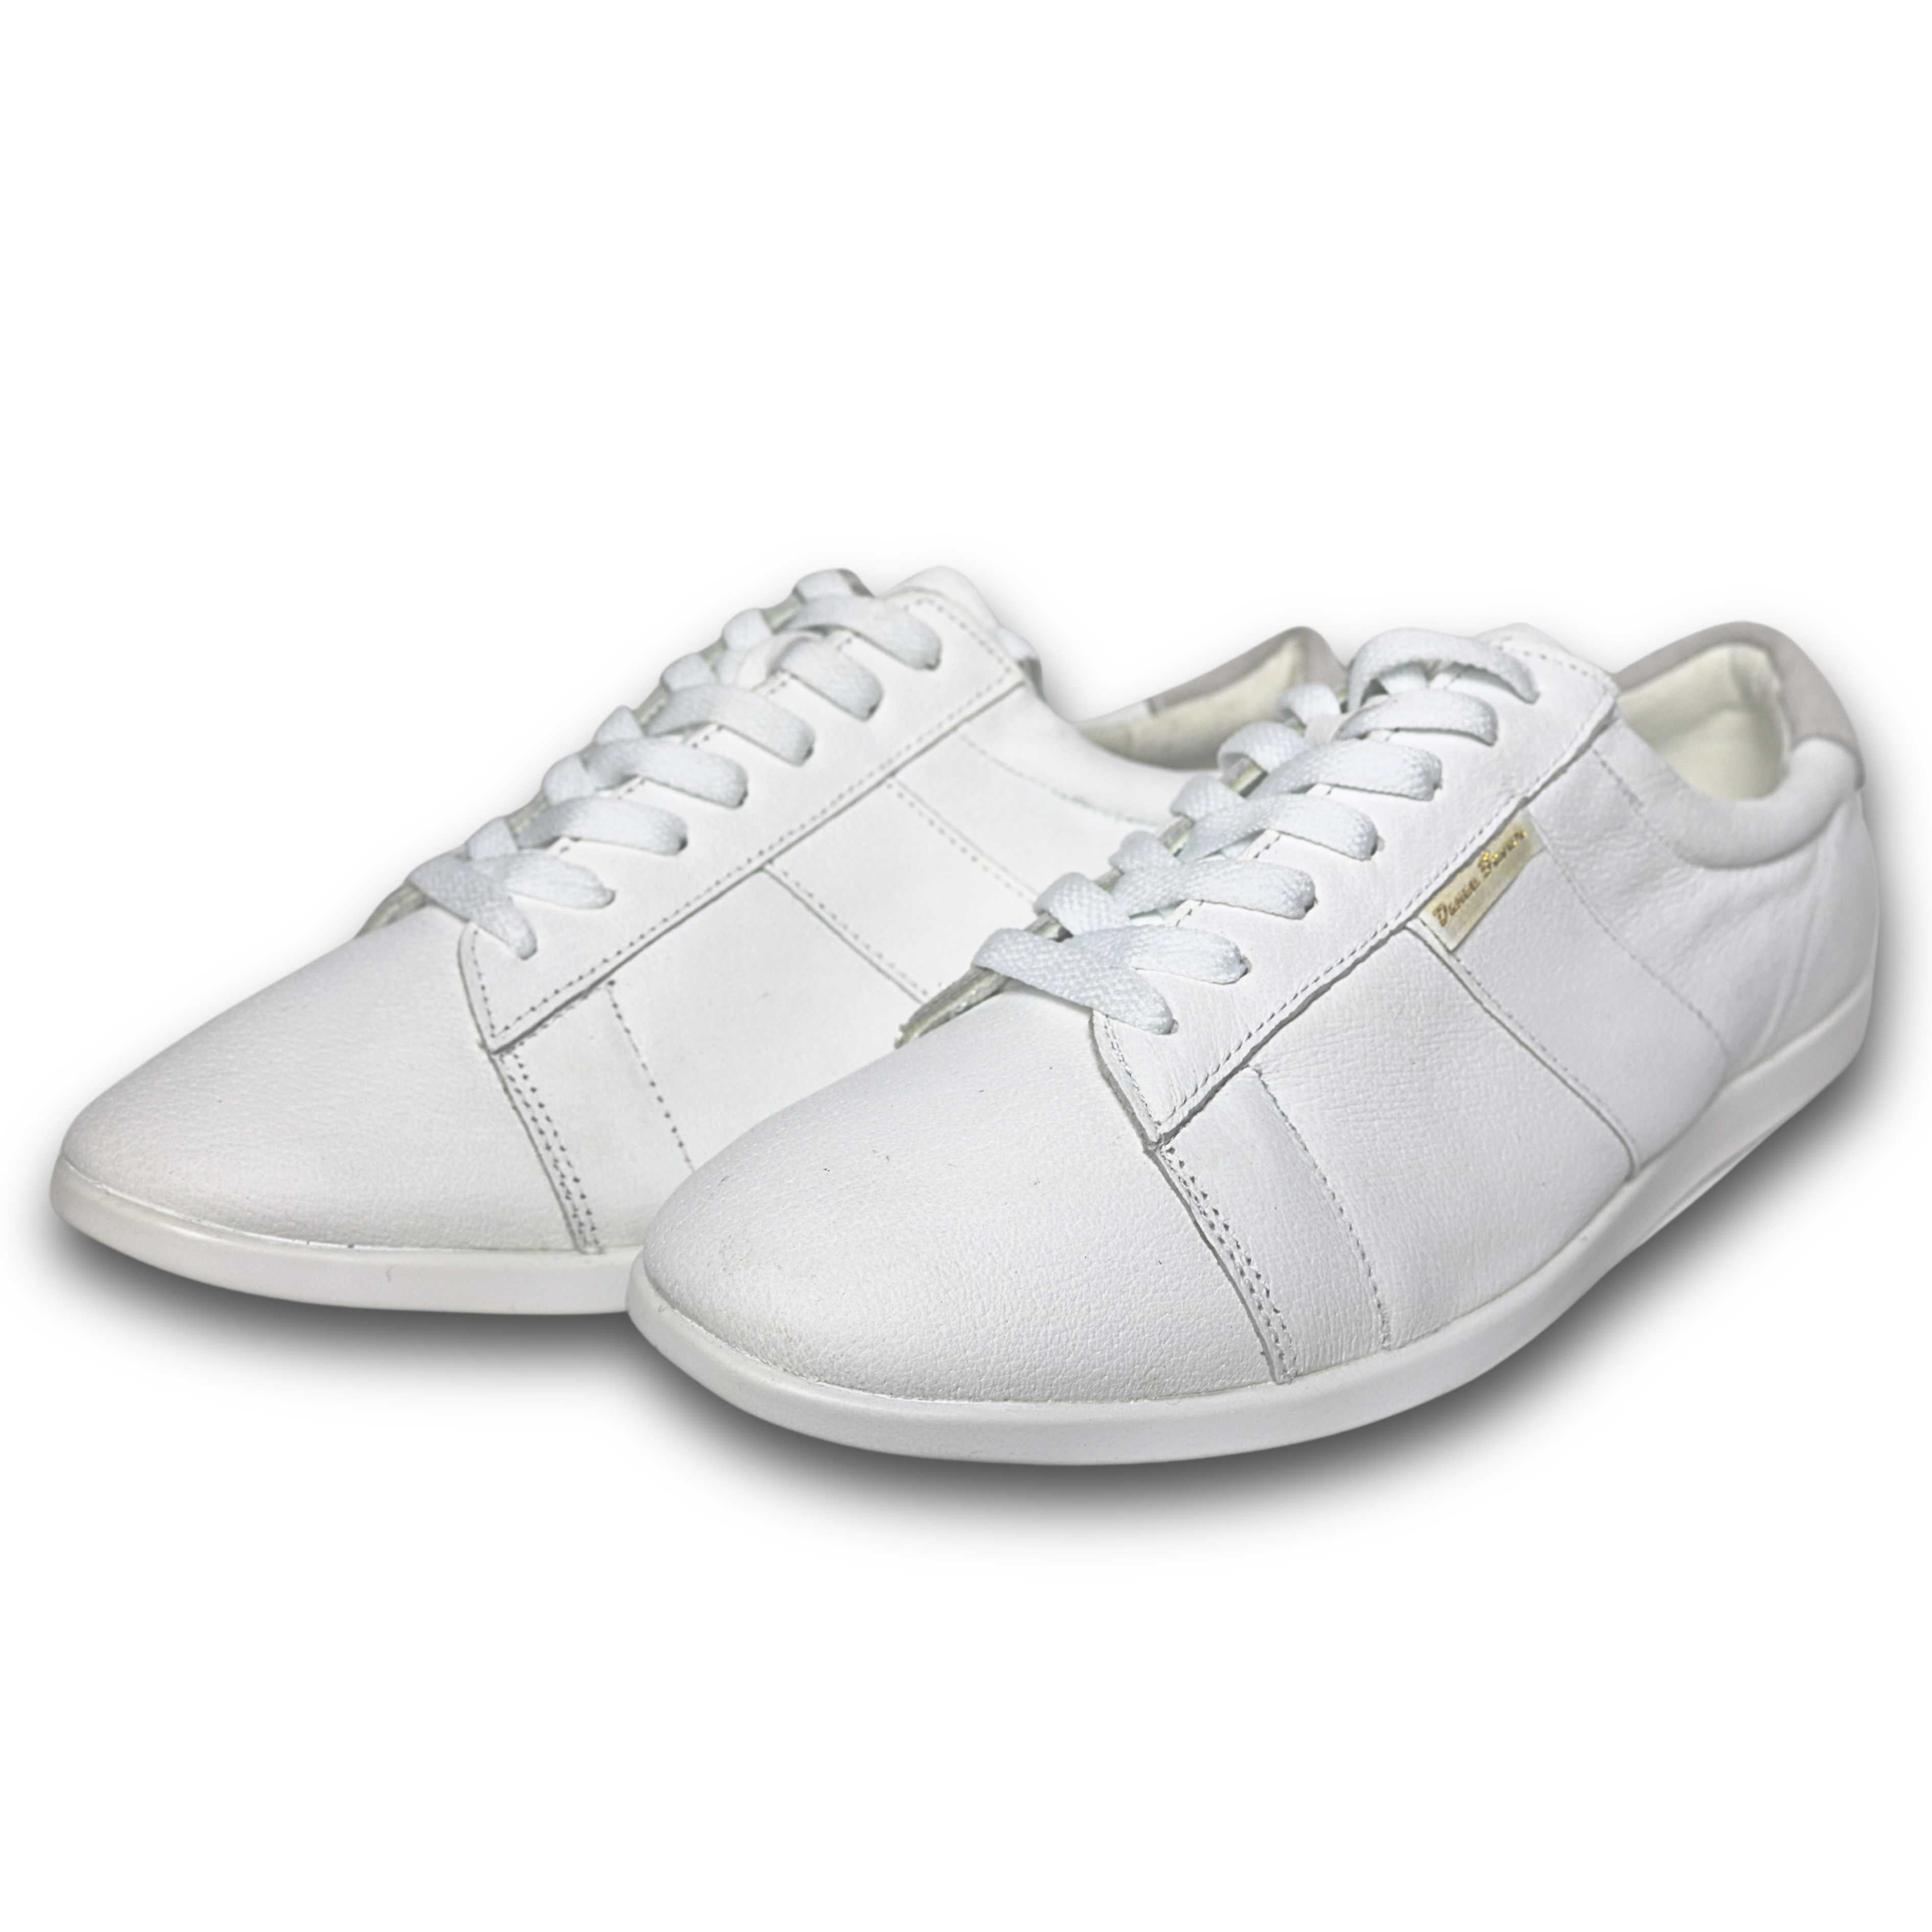 Men's White Leather Dance Sneakers with Dual Pivot Point, Spin Spots & Flexible, Smooth Sole - (2305W) - Rockabilly Australia Pty Ltd